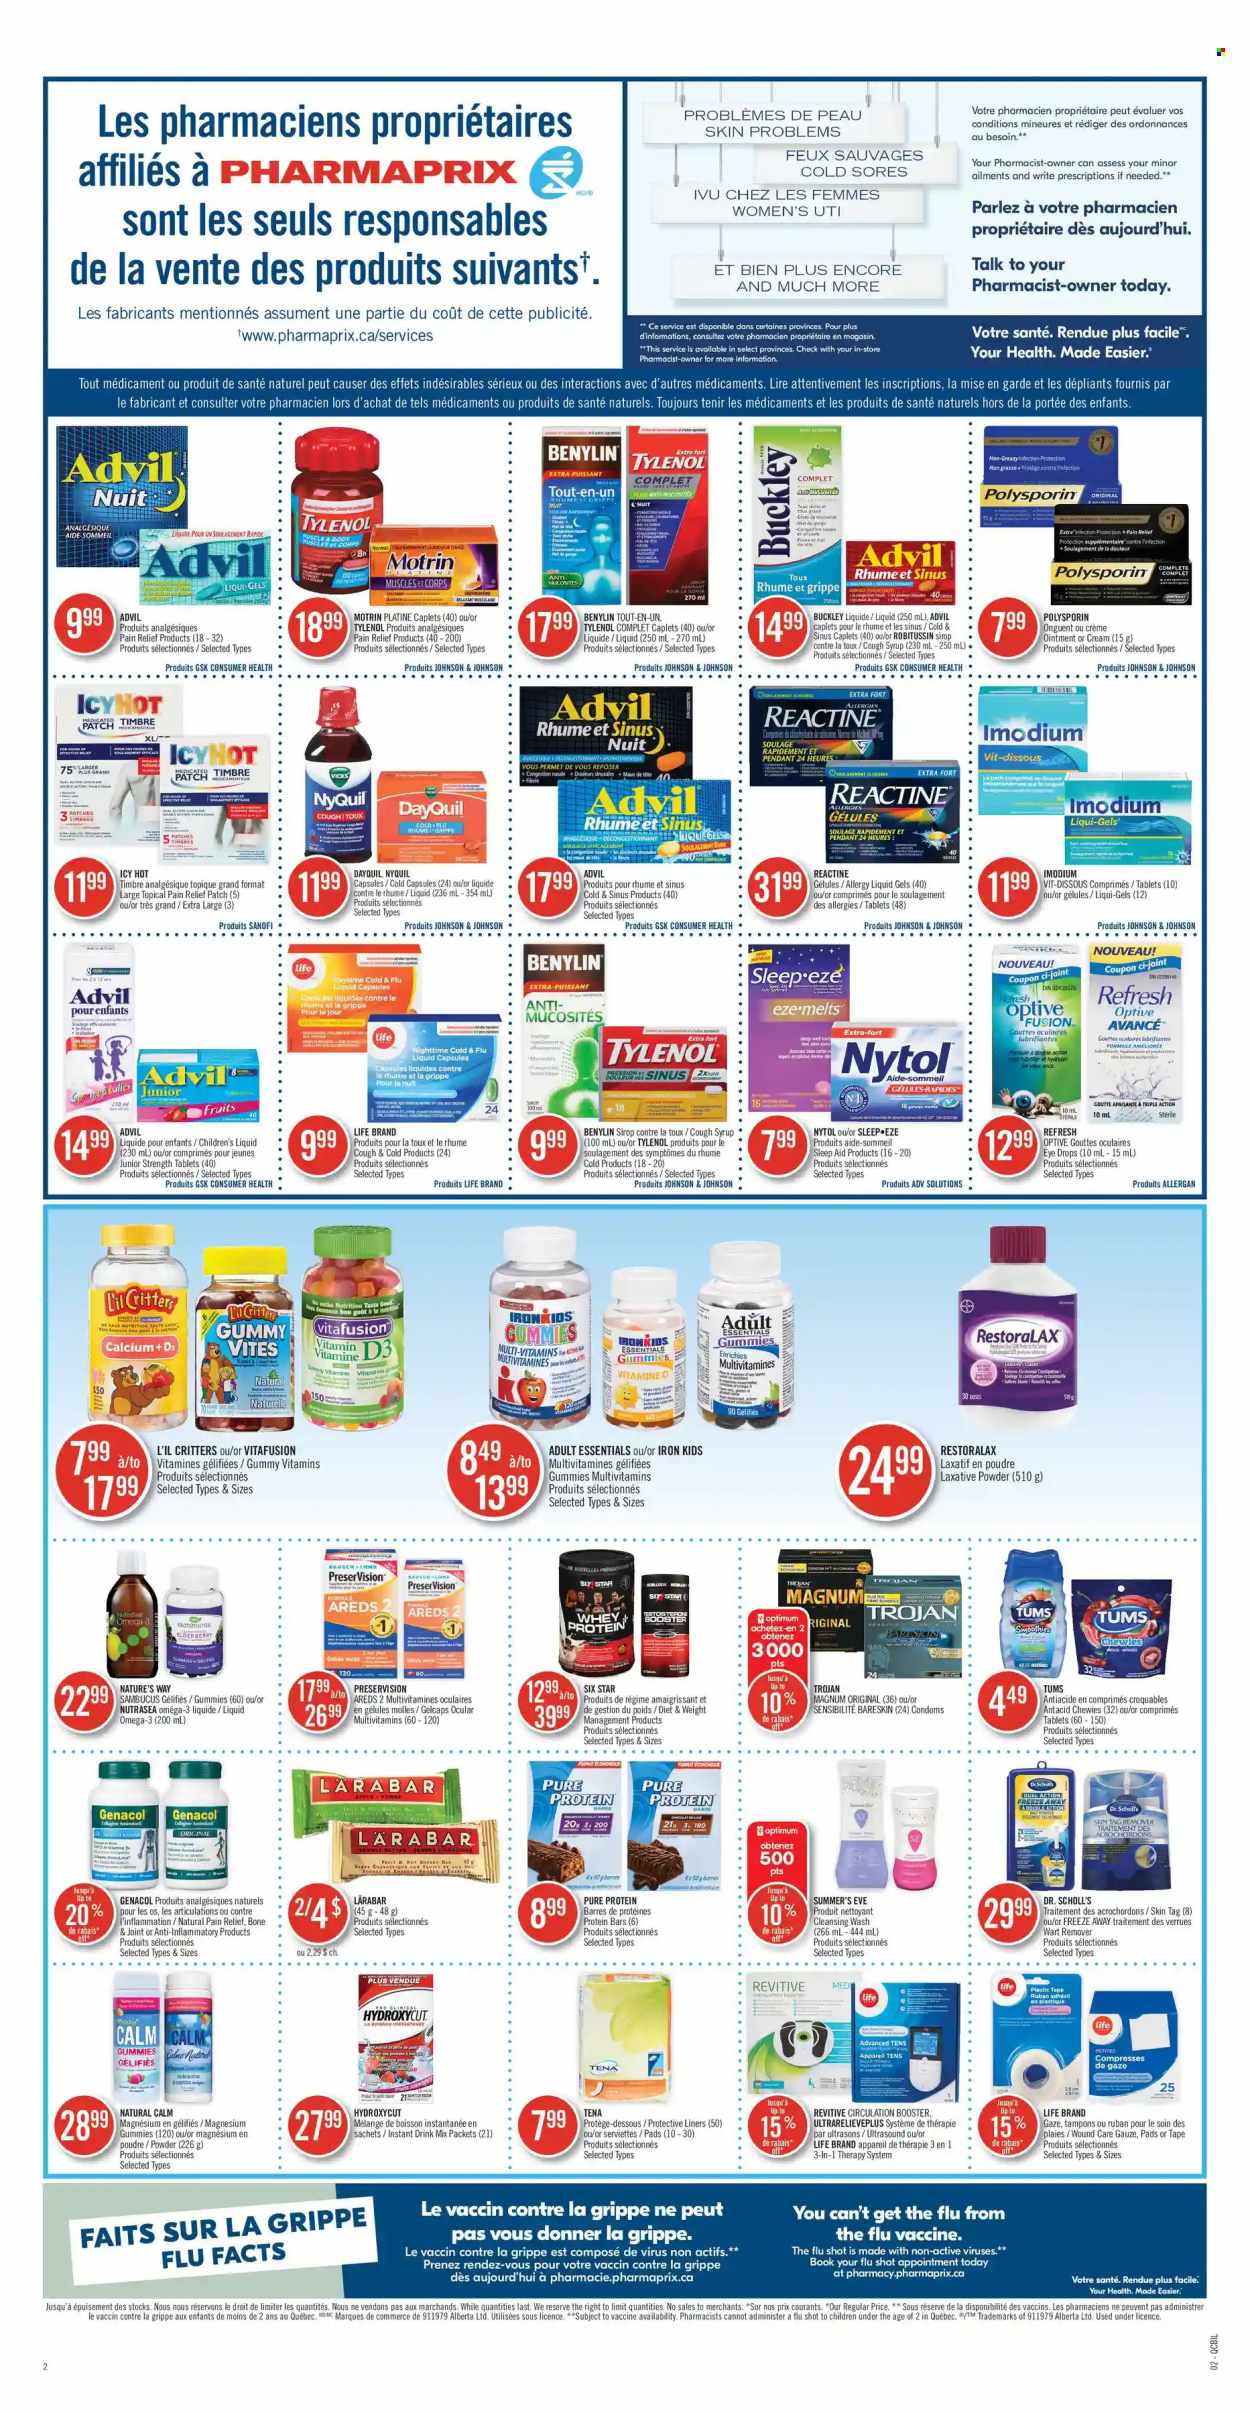 thumbnail - Pharmaprix Flyer - October 16, 2021 - October 22, 2021 - Sales products - Magnum, protein bar, syrup, Johnson's, ointment, tampons, Vicks, book, iron, Revitive, pendant, pain relief, DayQuil, Cold & Flu, magnesium, multivitamin, Tylenol, Vitafusion, NyQuil, Omega-3, eye drops, Advil Rapid, Antacid, laxative, vitamin D3, Benylin, Motrin, Dr. Scholl's, calcium, Robitussin, Imodium. Page 2.